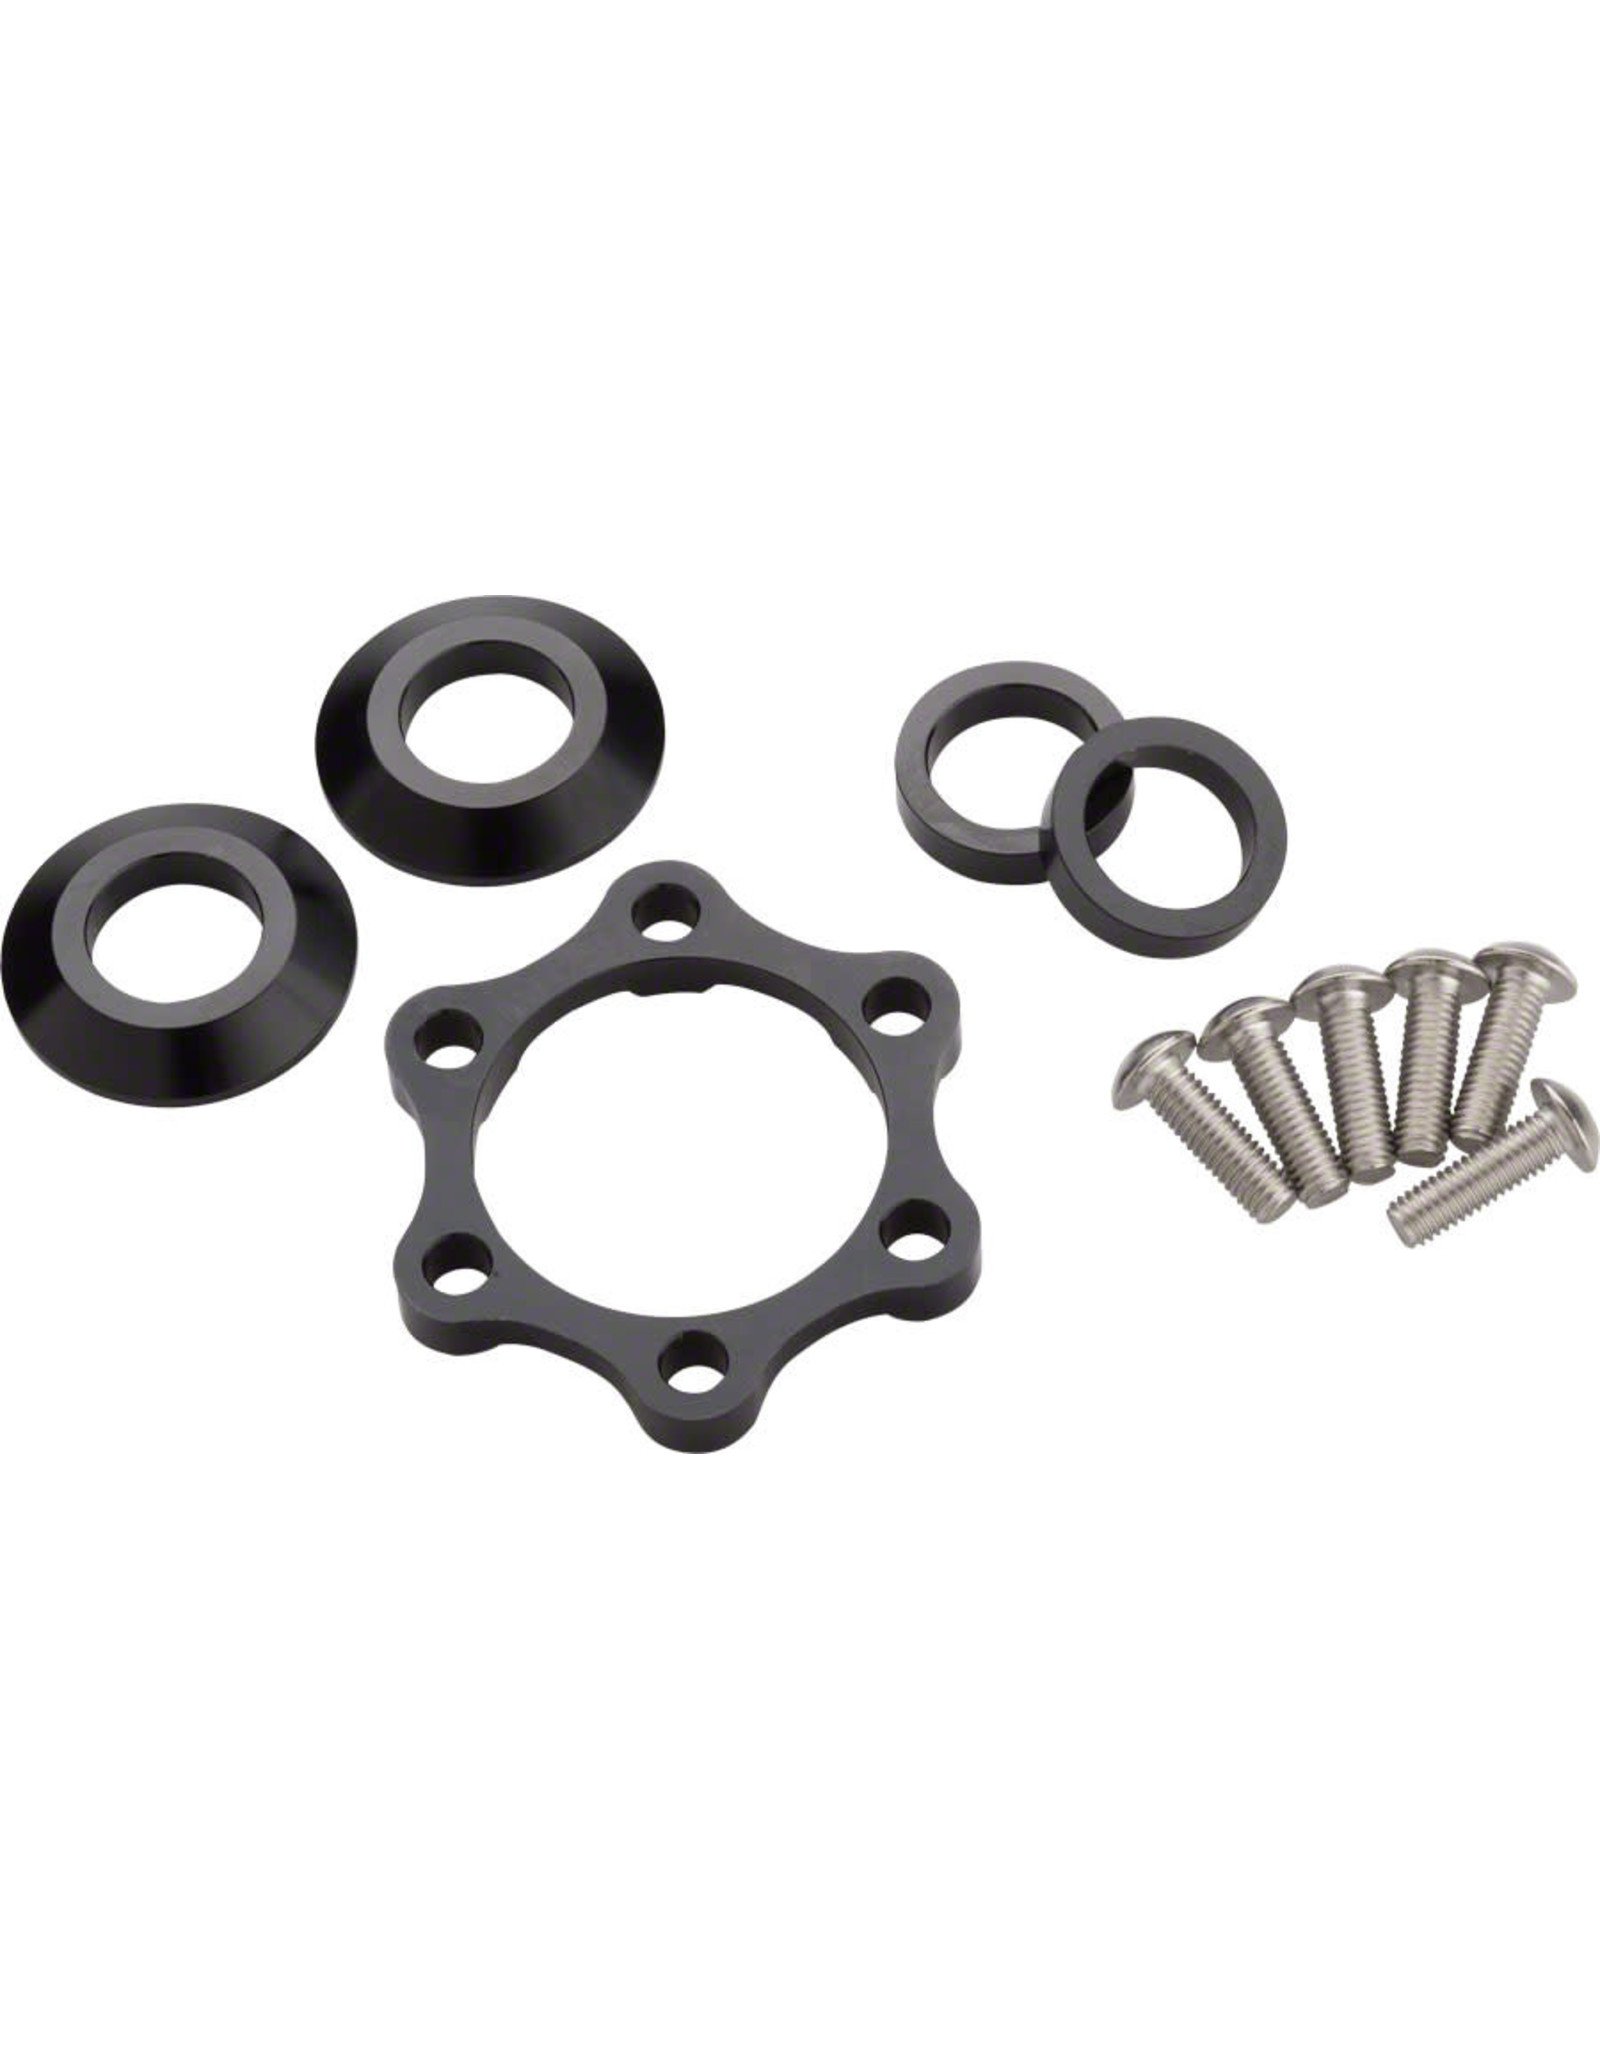 Problem Solvers Problem Solvers Front 10mm Booster Kit - 6-Bolt Hub (100mm to 110mm Hub Adapter)